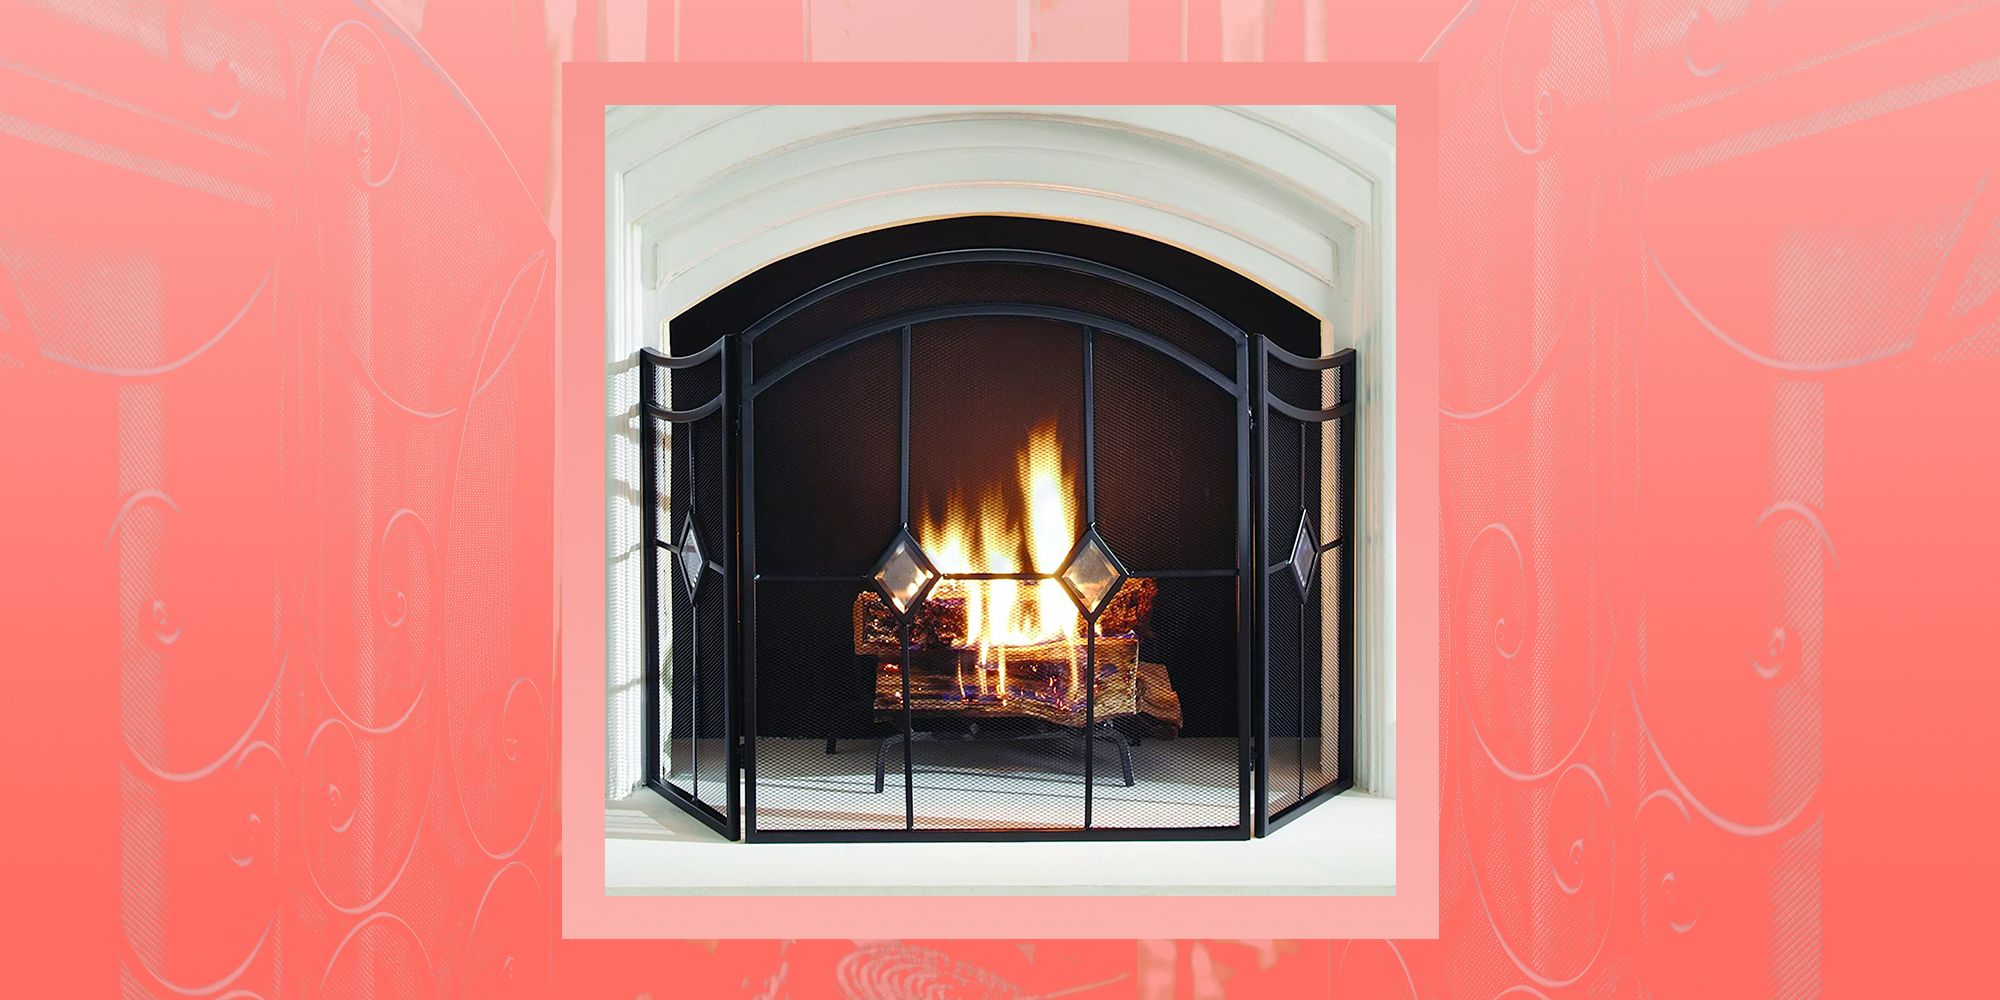 15 Best Fireplace Screens for Winter 2021 Decorative Fireplace Screens